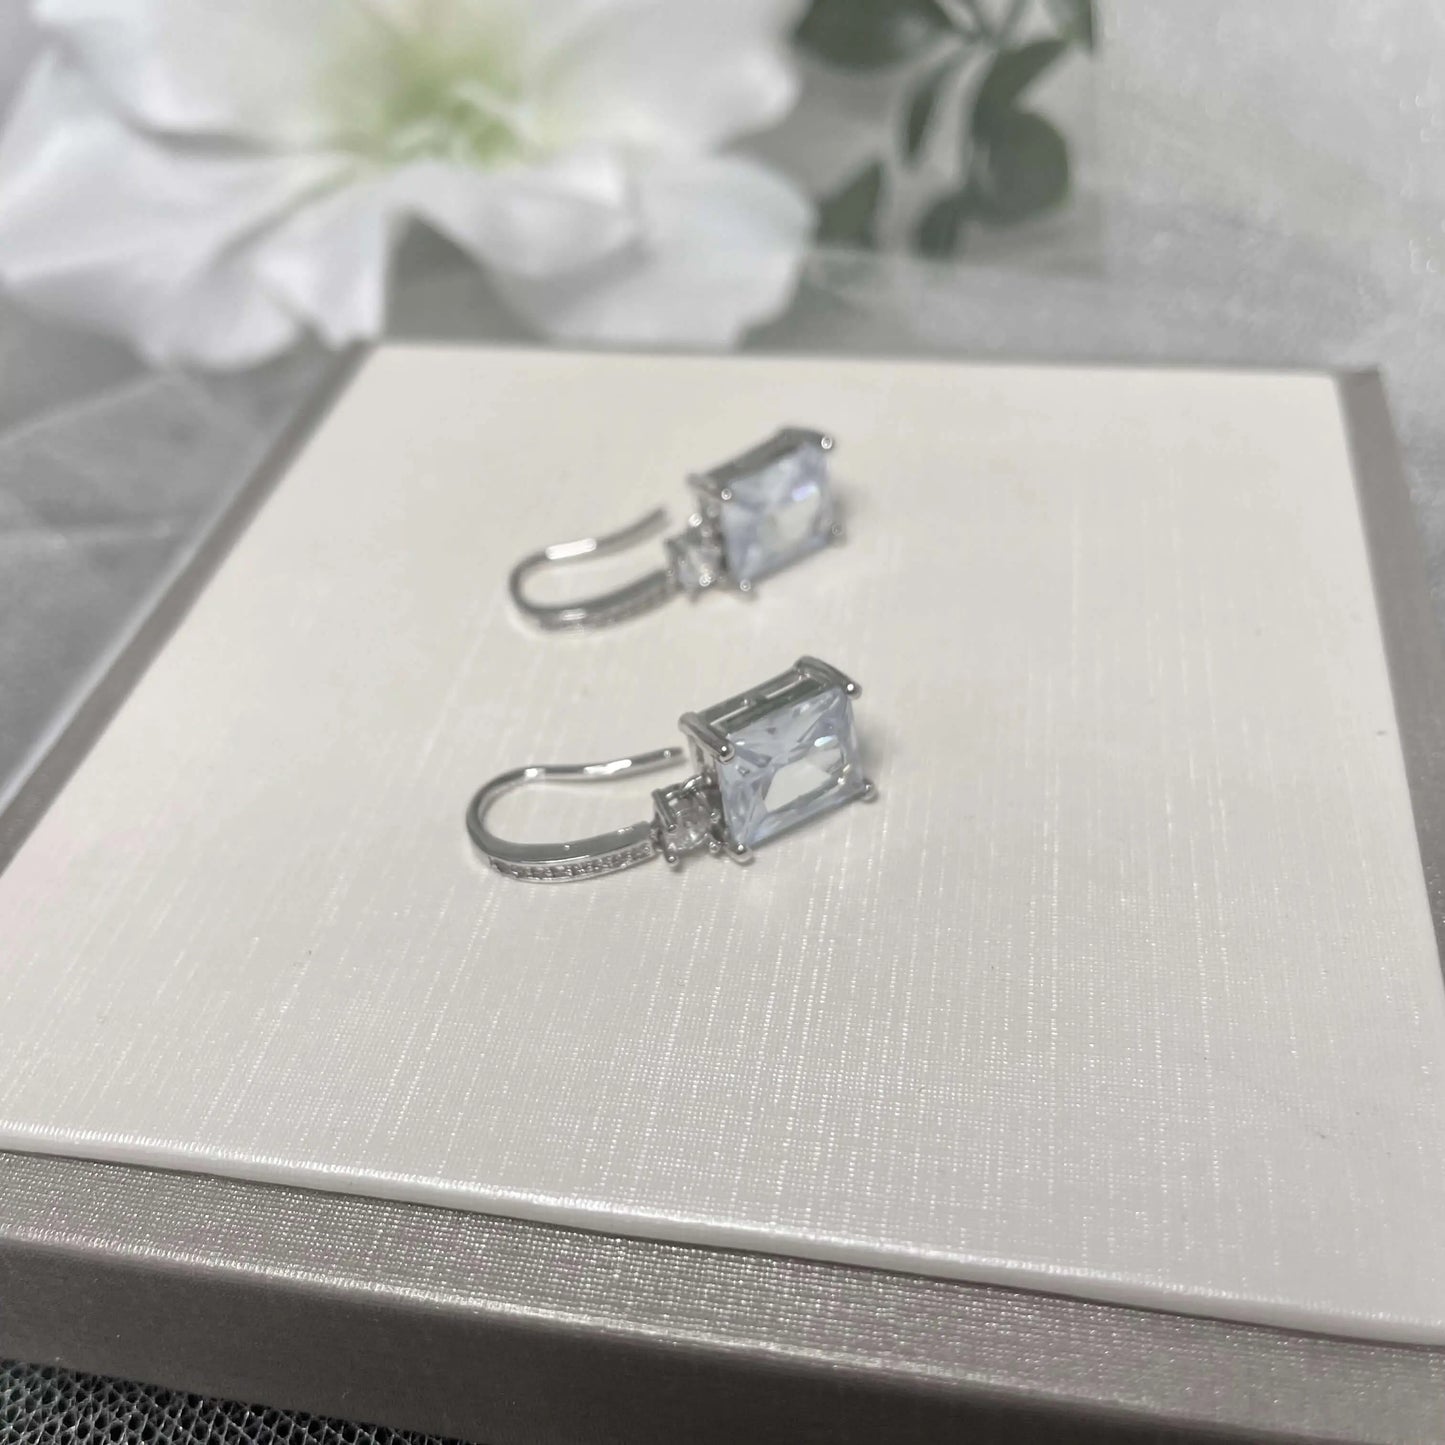 Henrietta Sterling Silver Cubic Zirconia Earrings featuring a princess drop design with AAAAA cubic zirconia stones set in 925 sterling silver, perfect for weddings and special occasions.